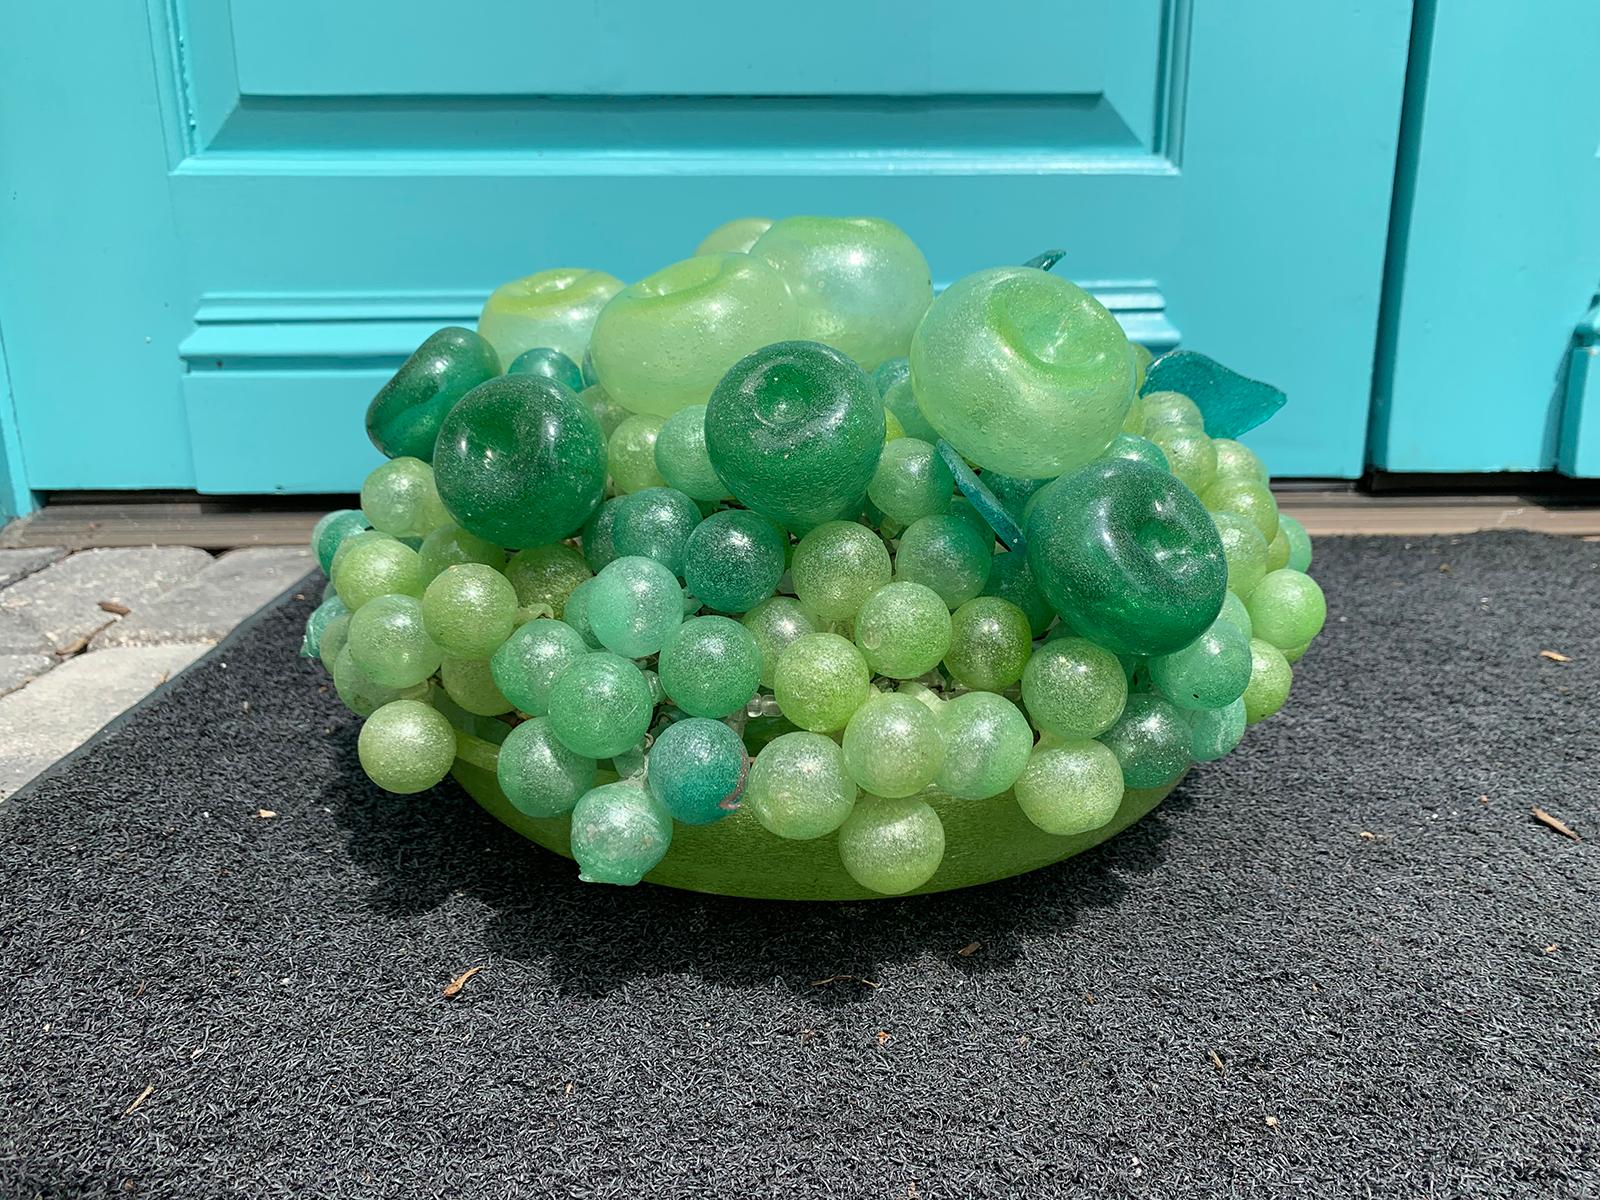 20th century large Italian Murano glass fruit centerpiece, green glass bowl
grapes and pears.